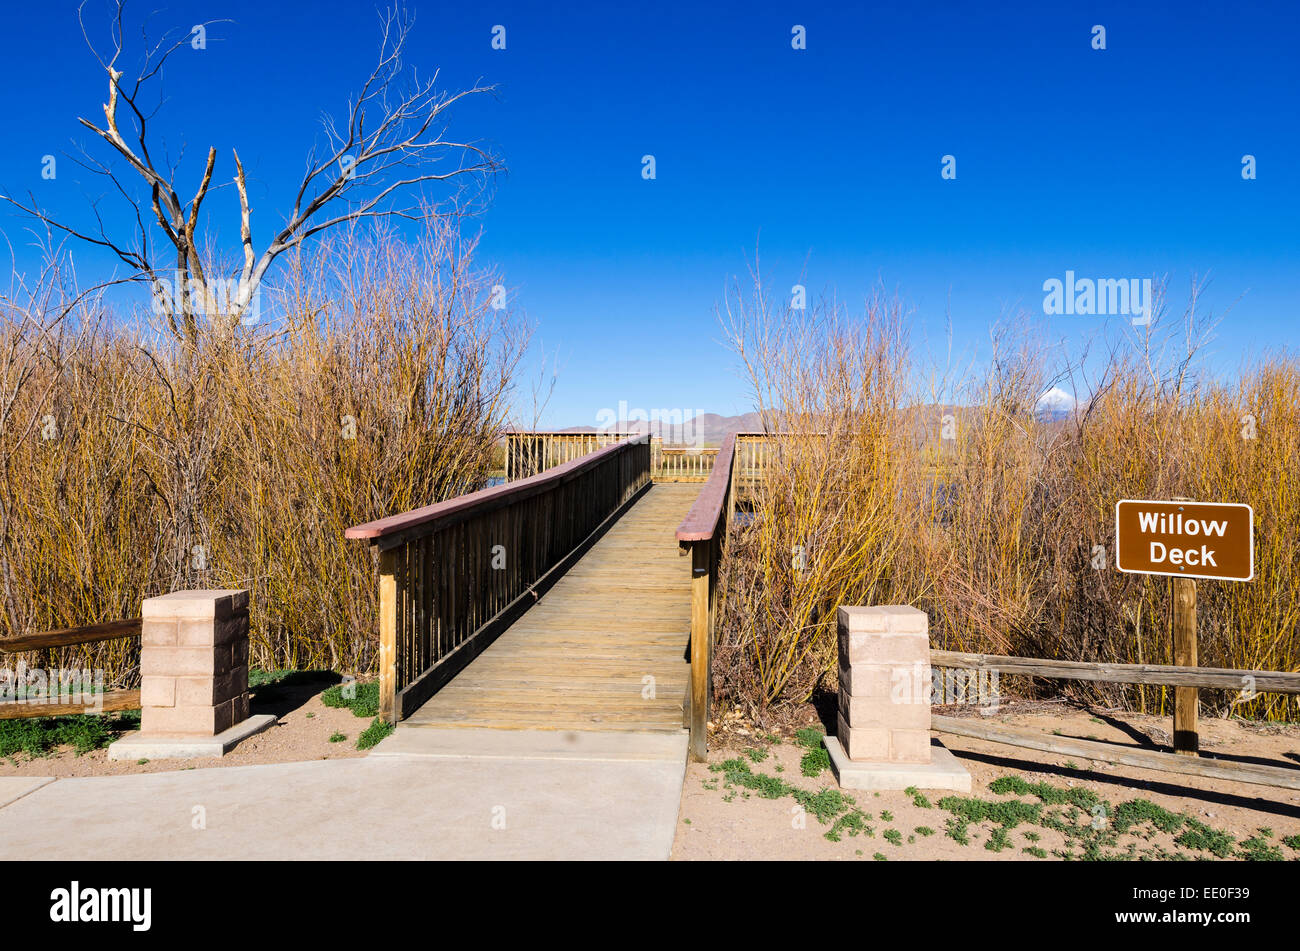 Observation deck at Bosque del Apache National Wildlife Refuge, New Mexico USA Stock Photo